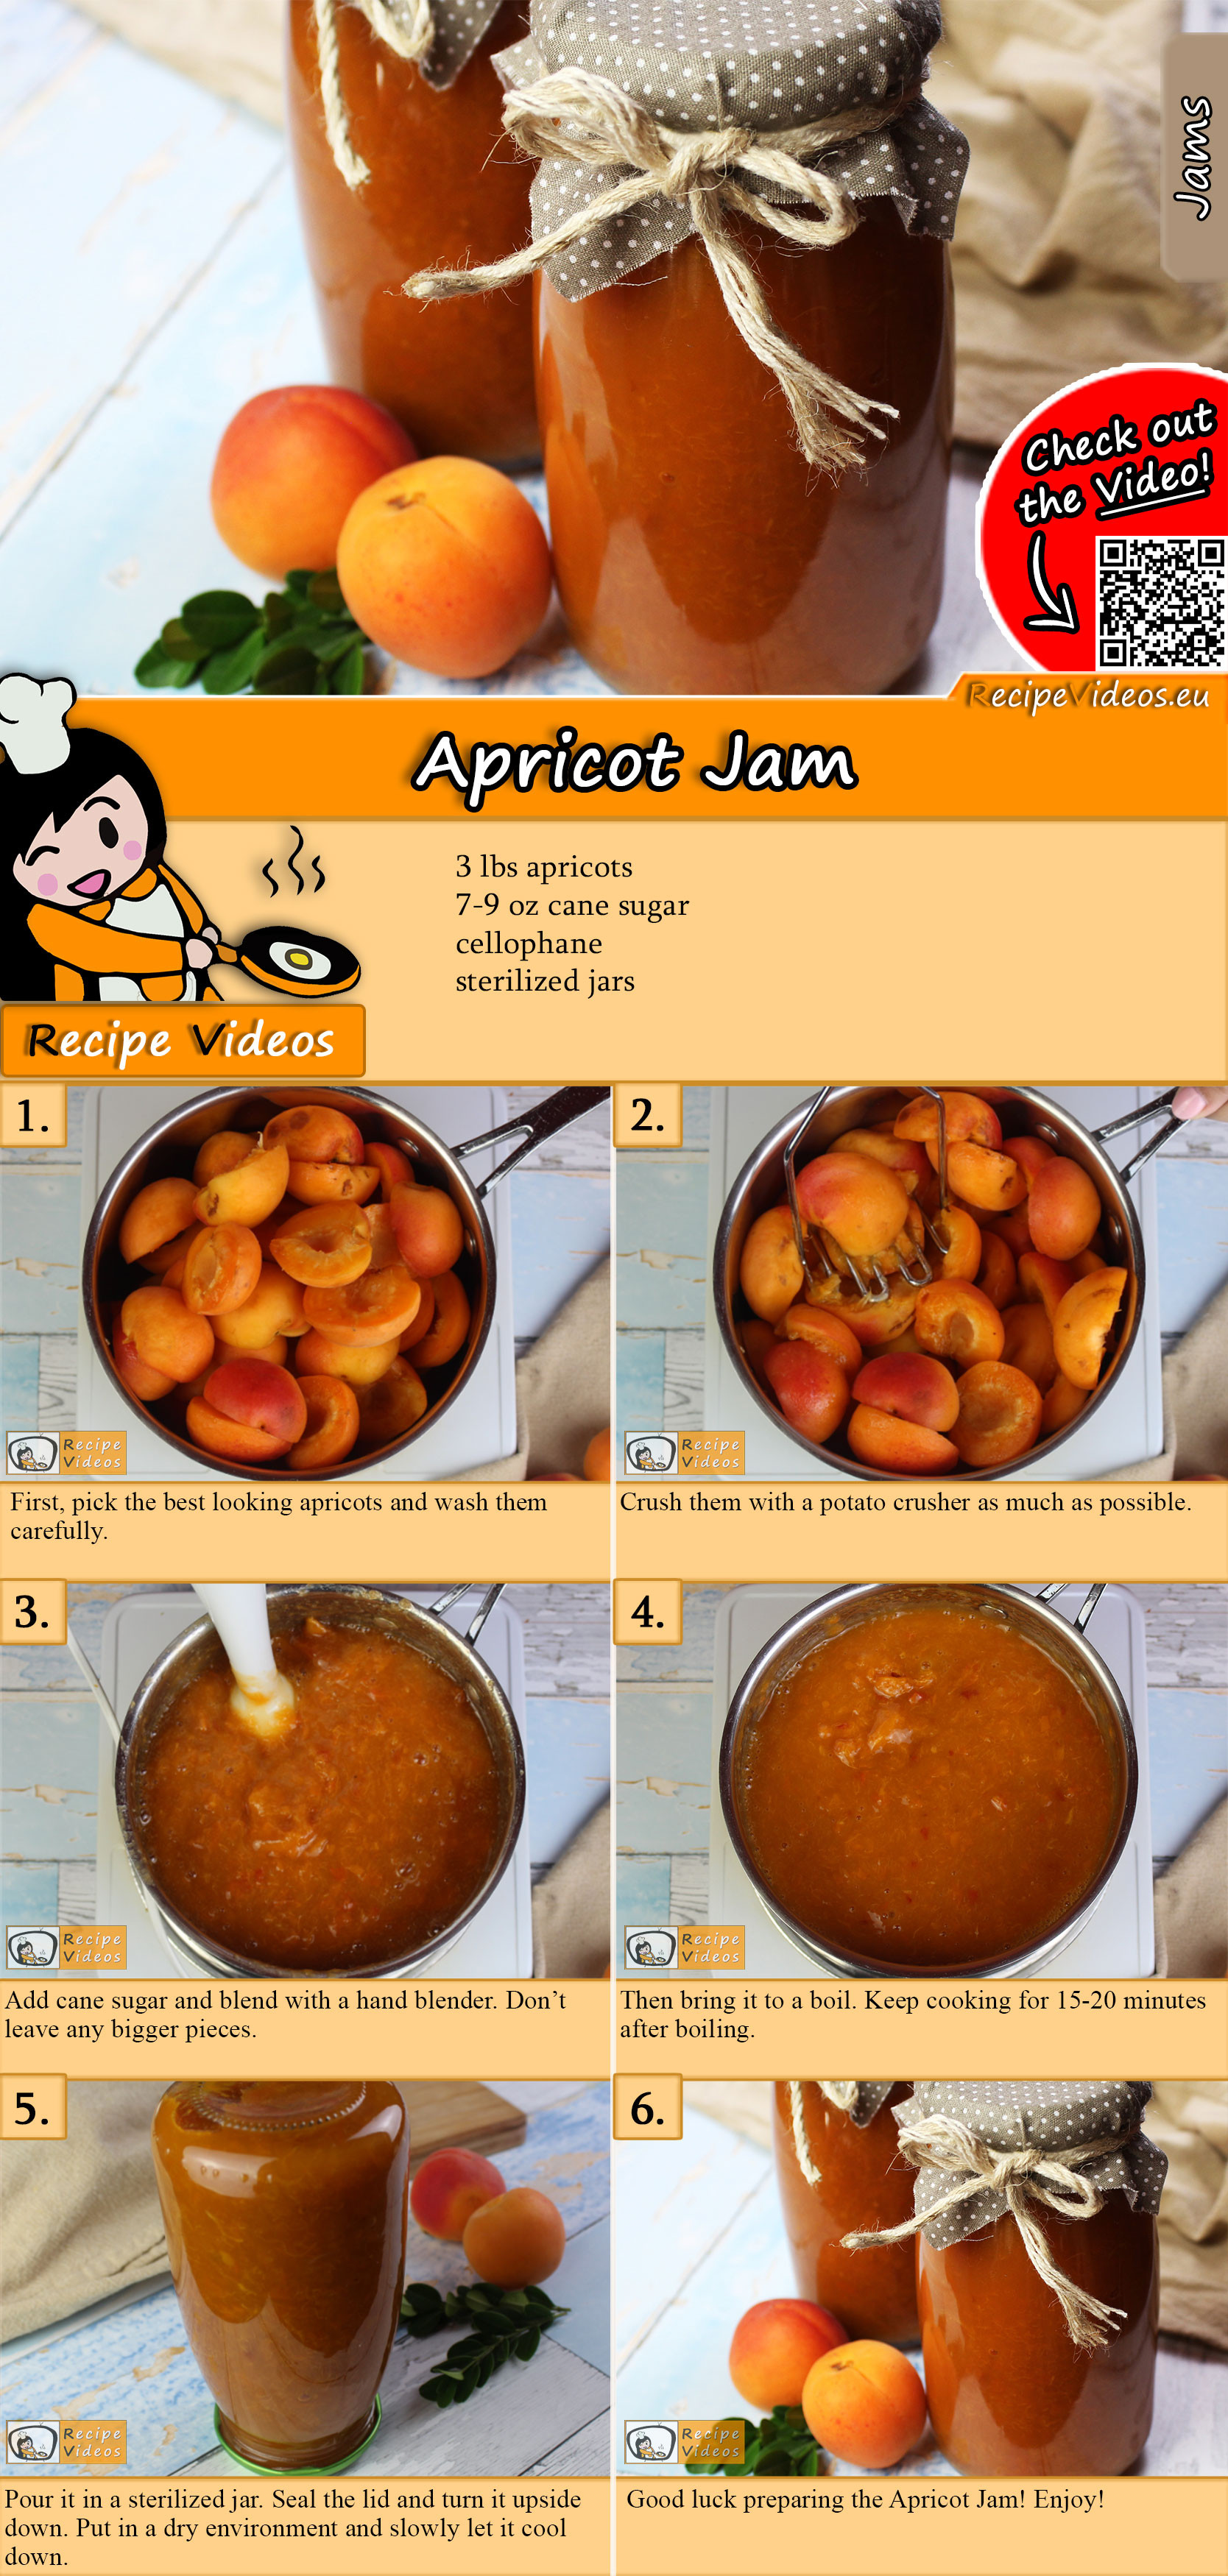 Apricot jam recipe with video